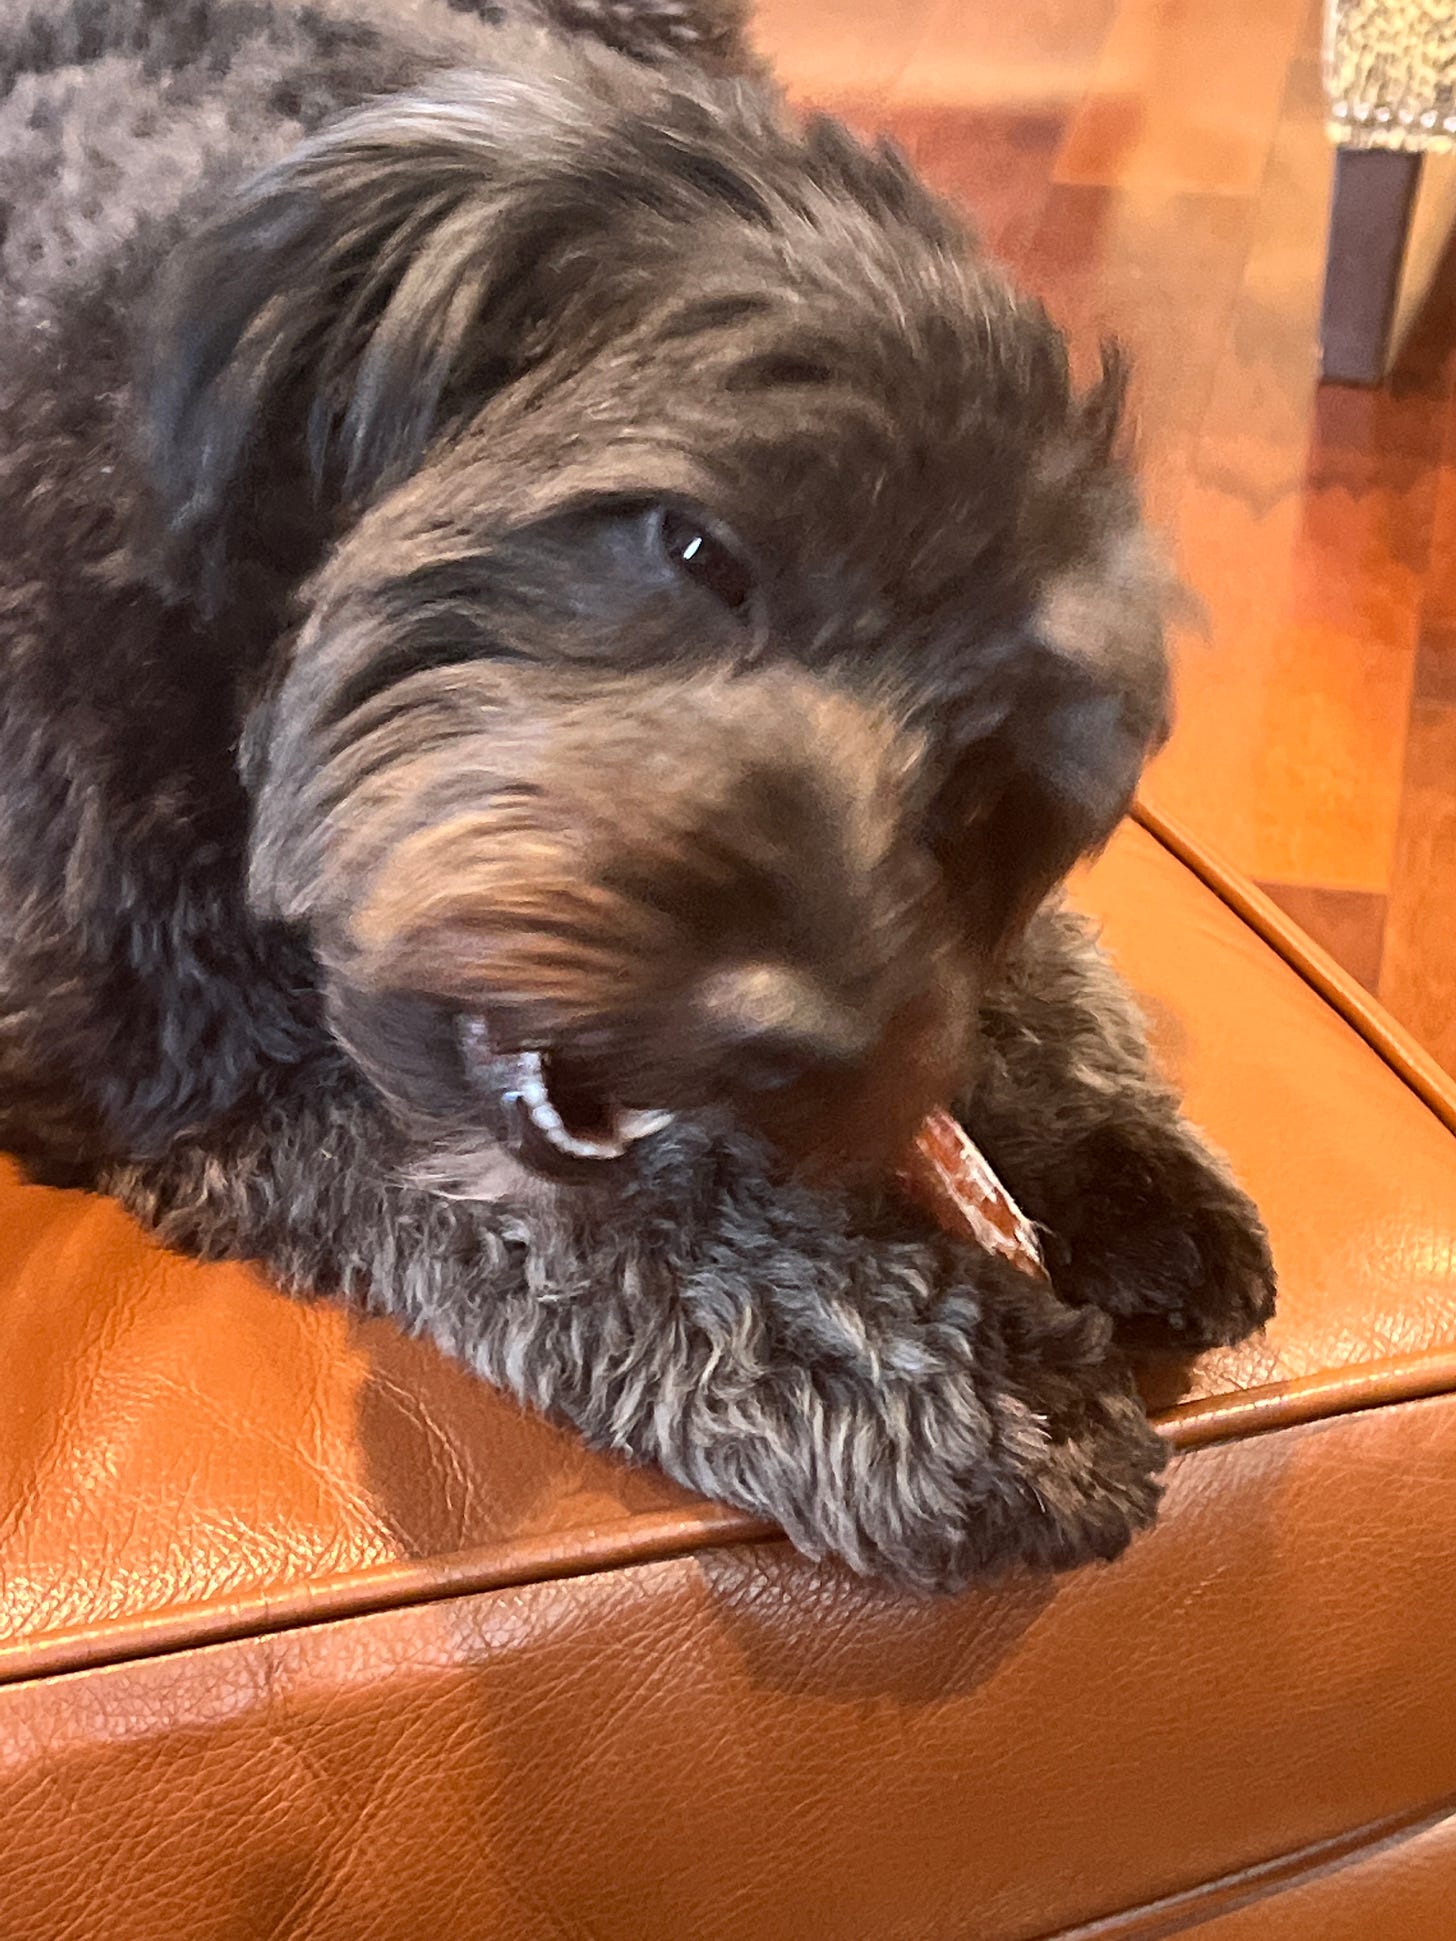 Dog snacking on a treat